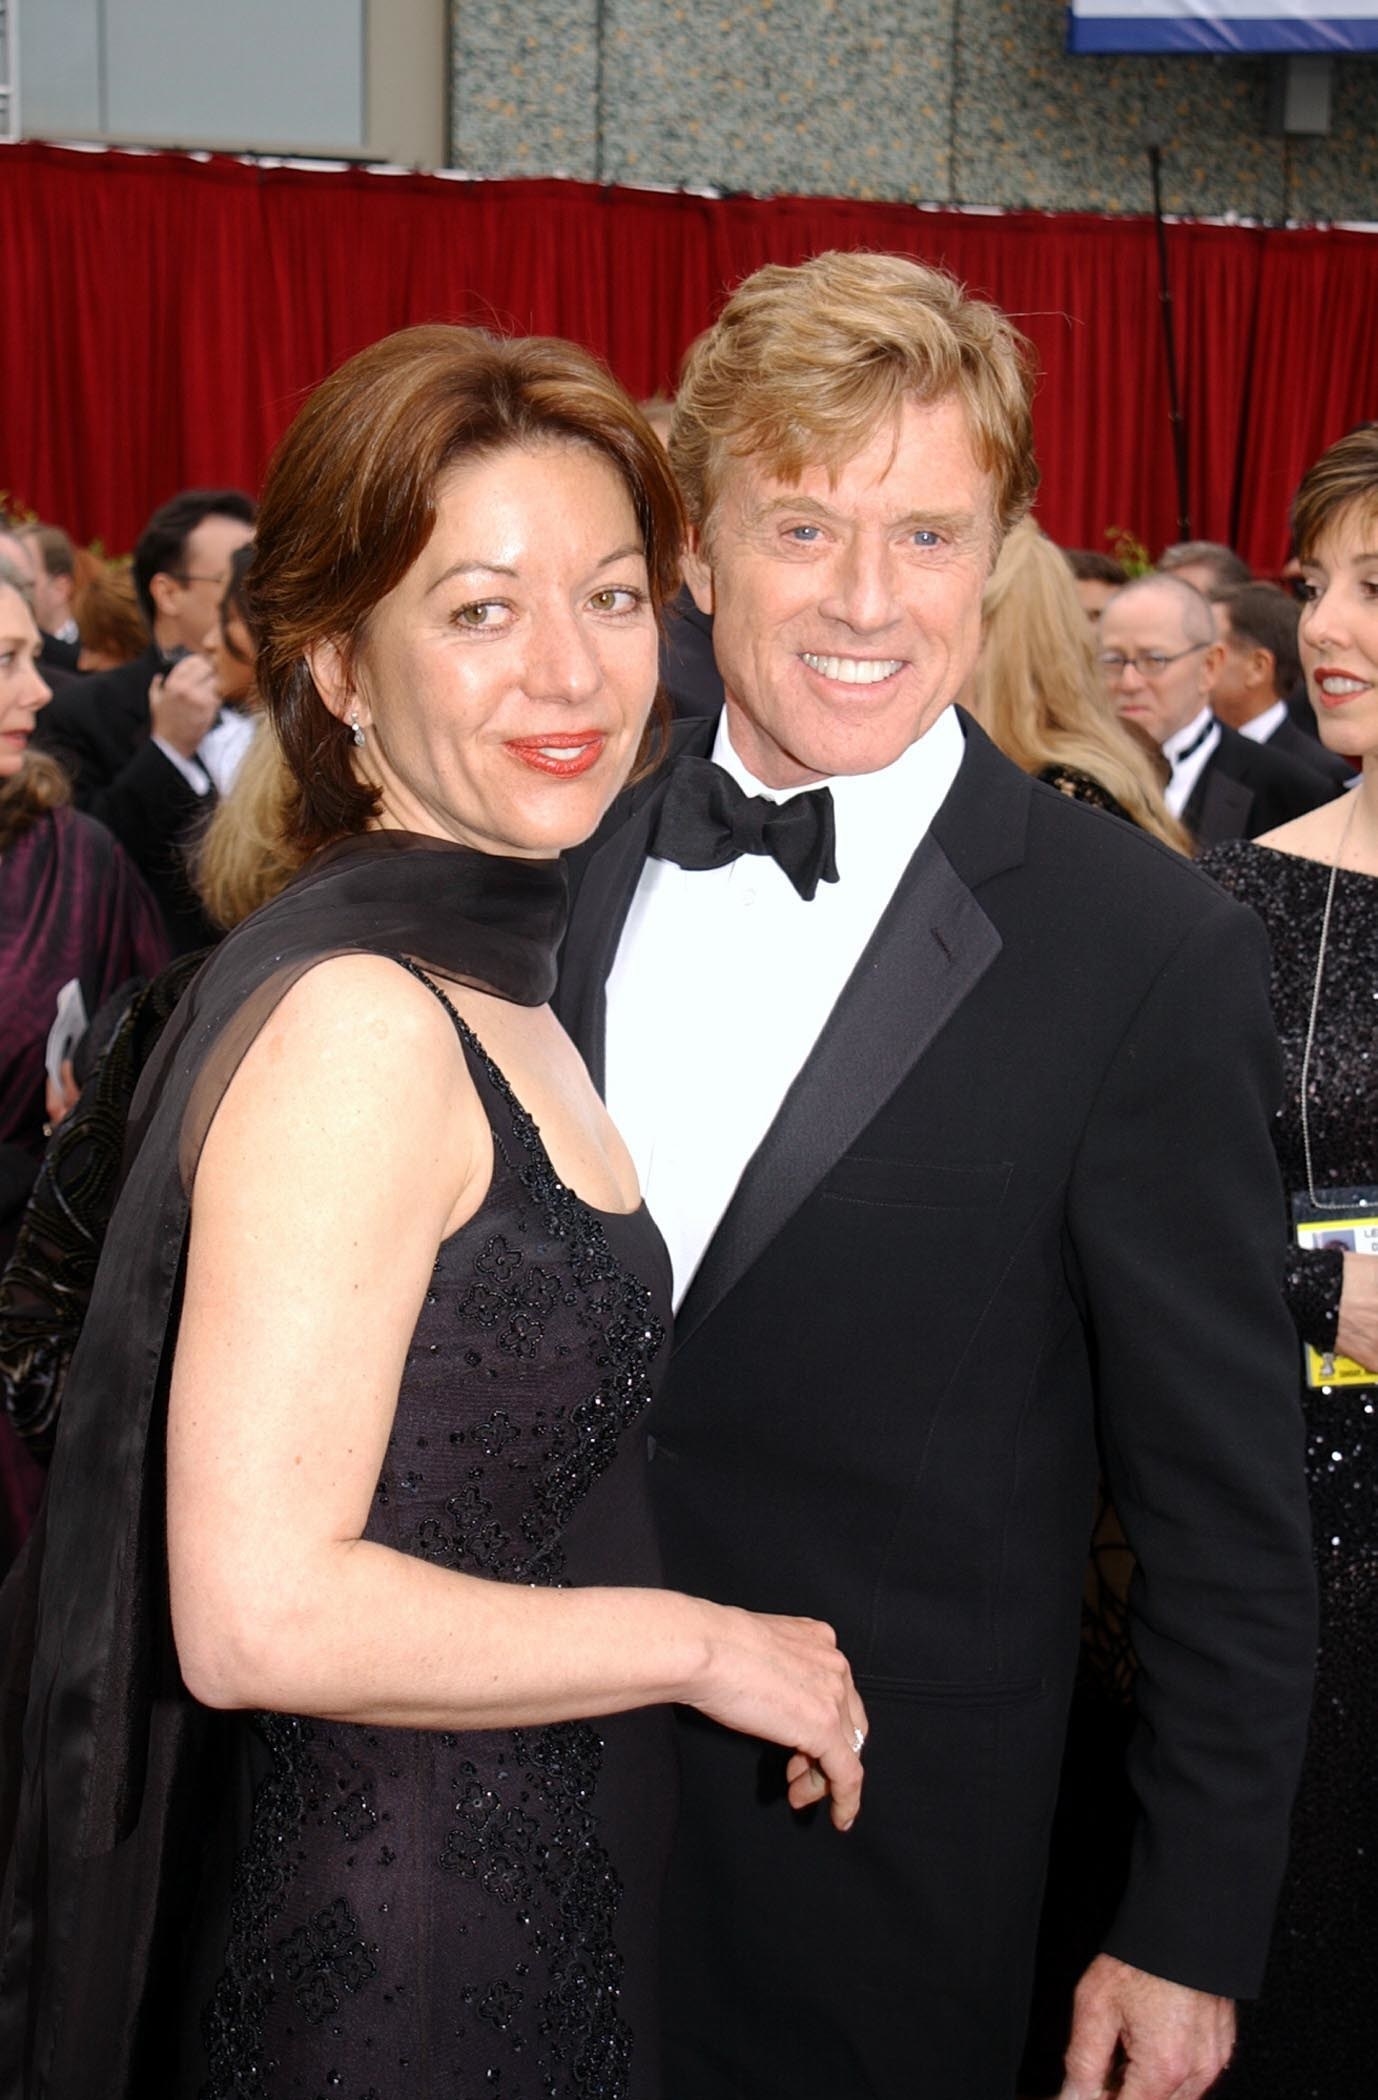 Robert Redford and Sibylle Szaggars standing together on the red carpet